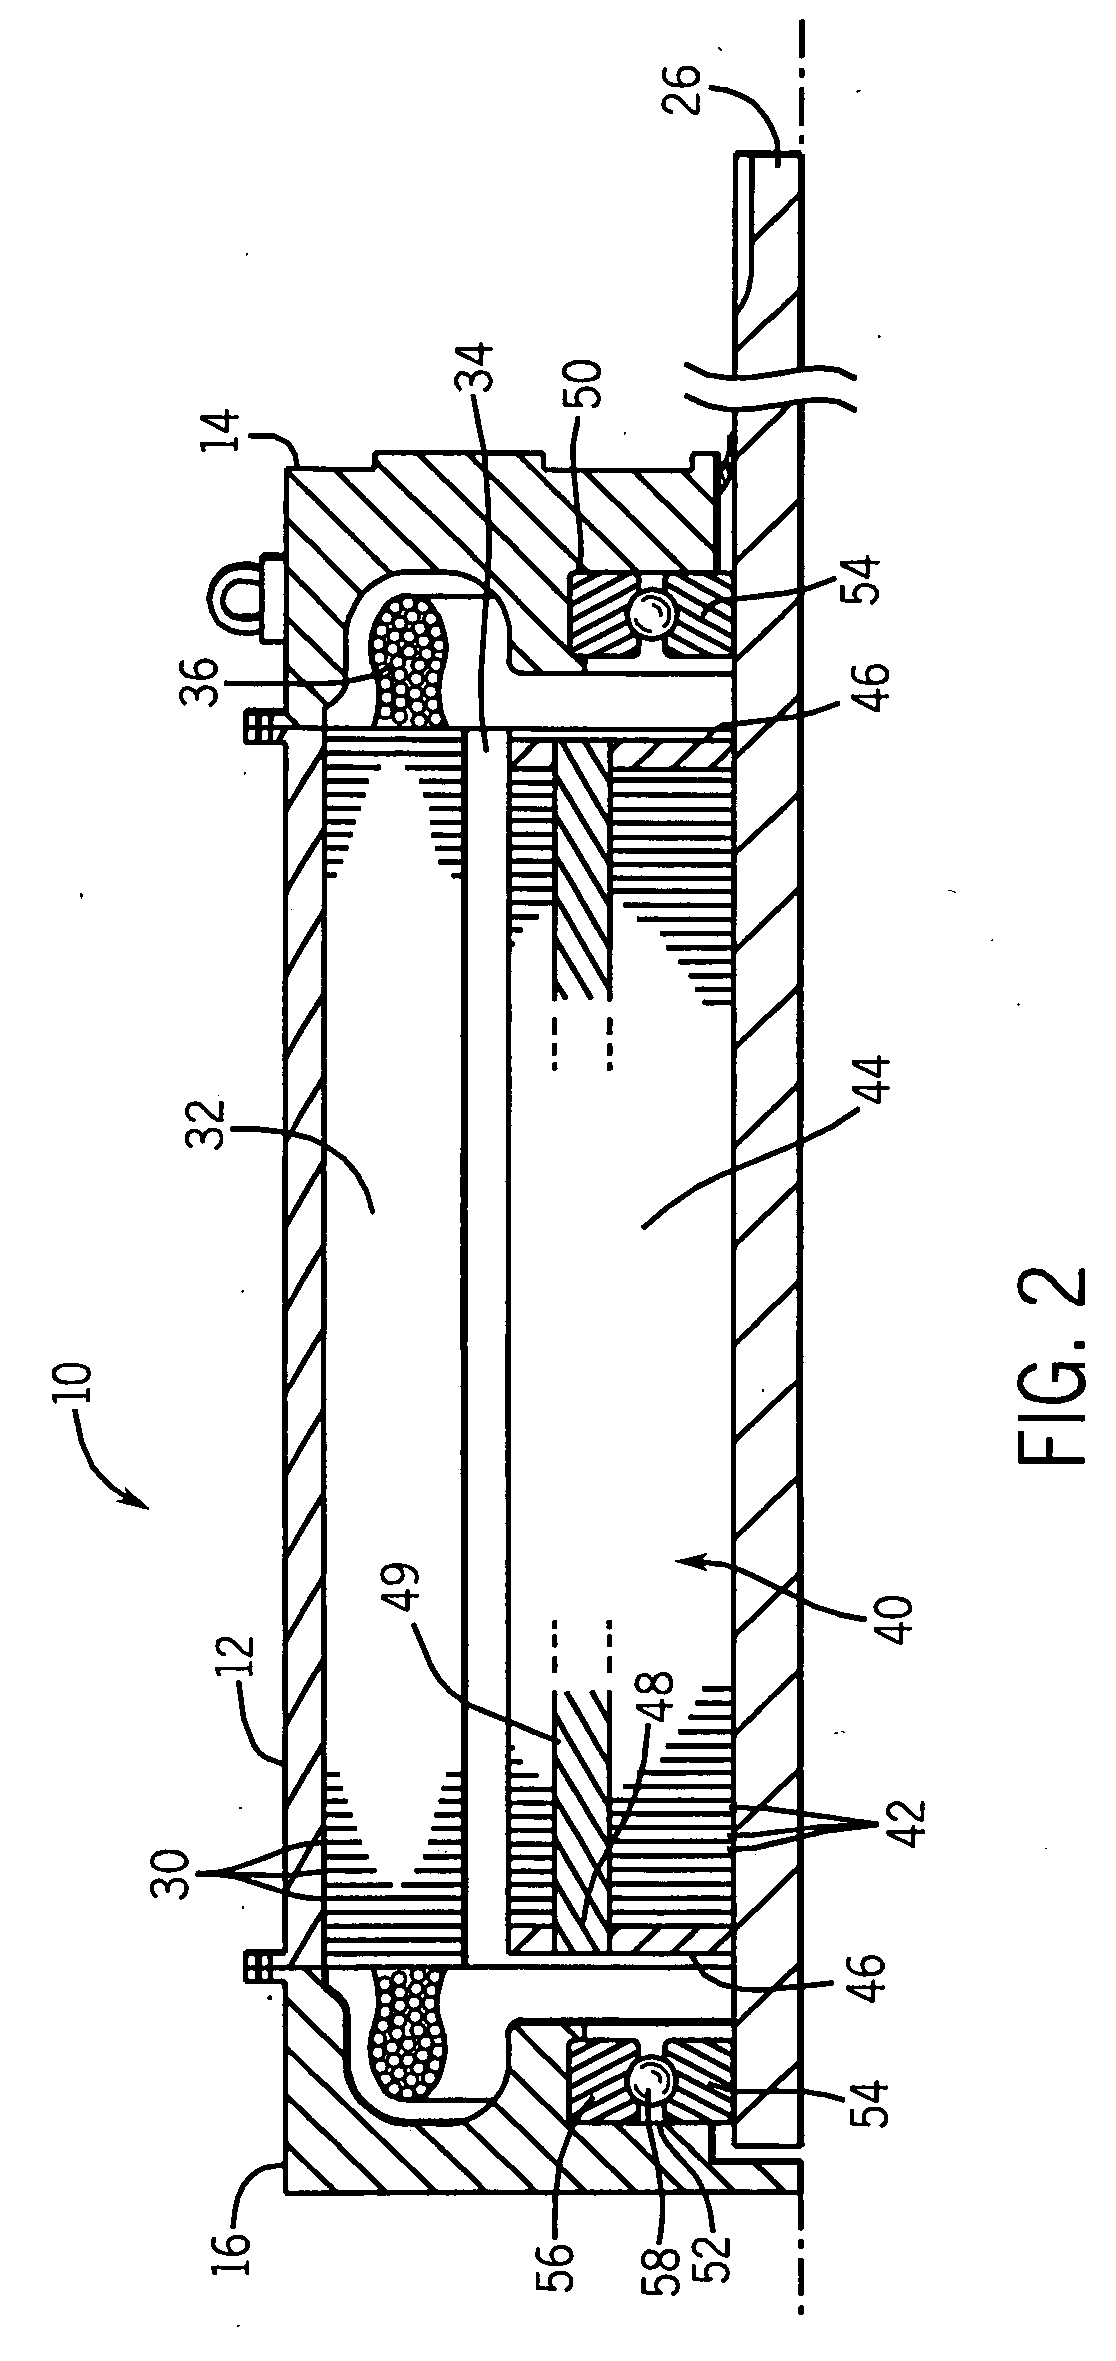 Electric motor having different stator lamination and rotor lamination constructions